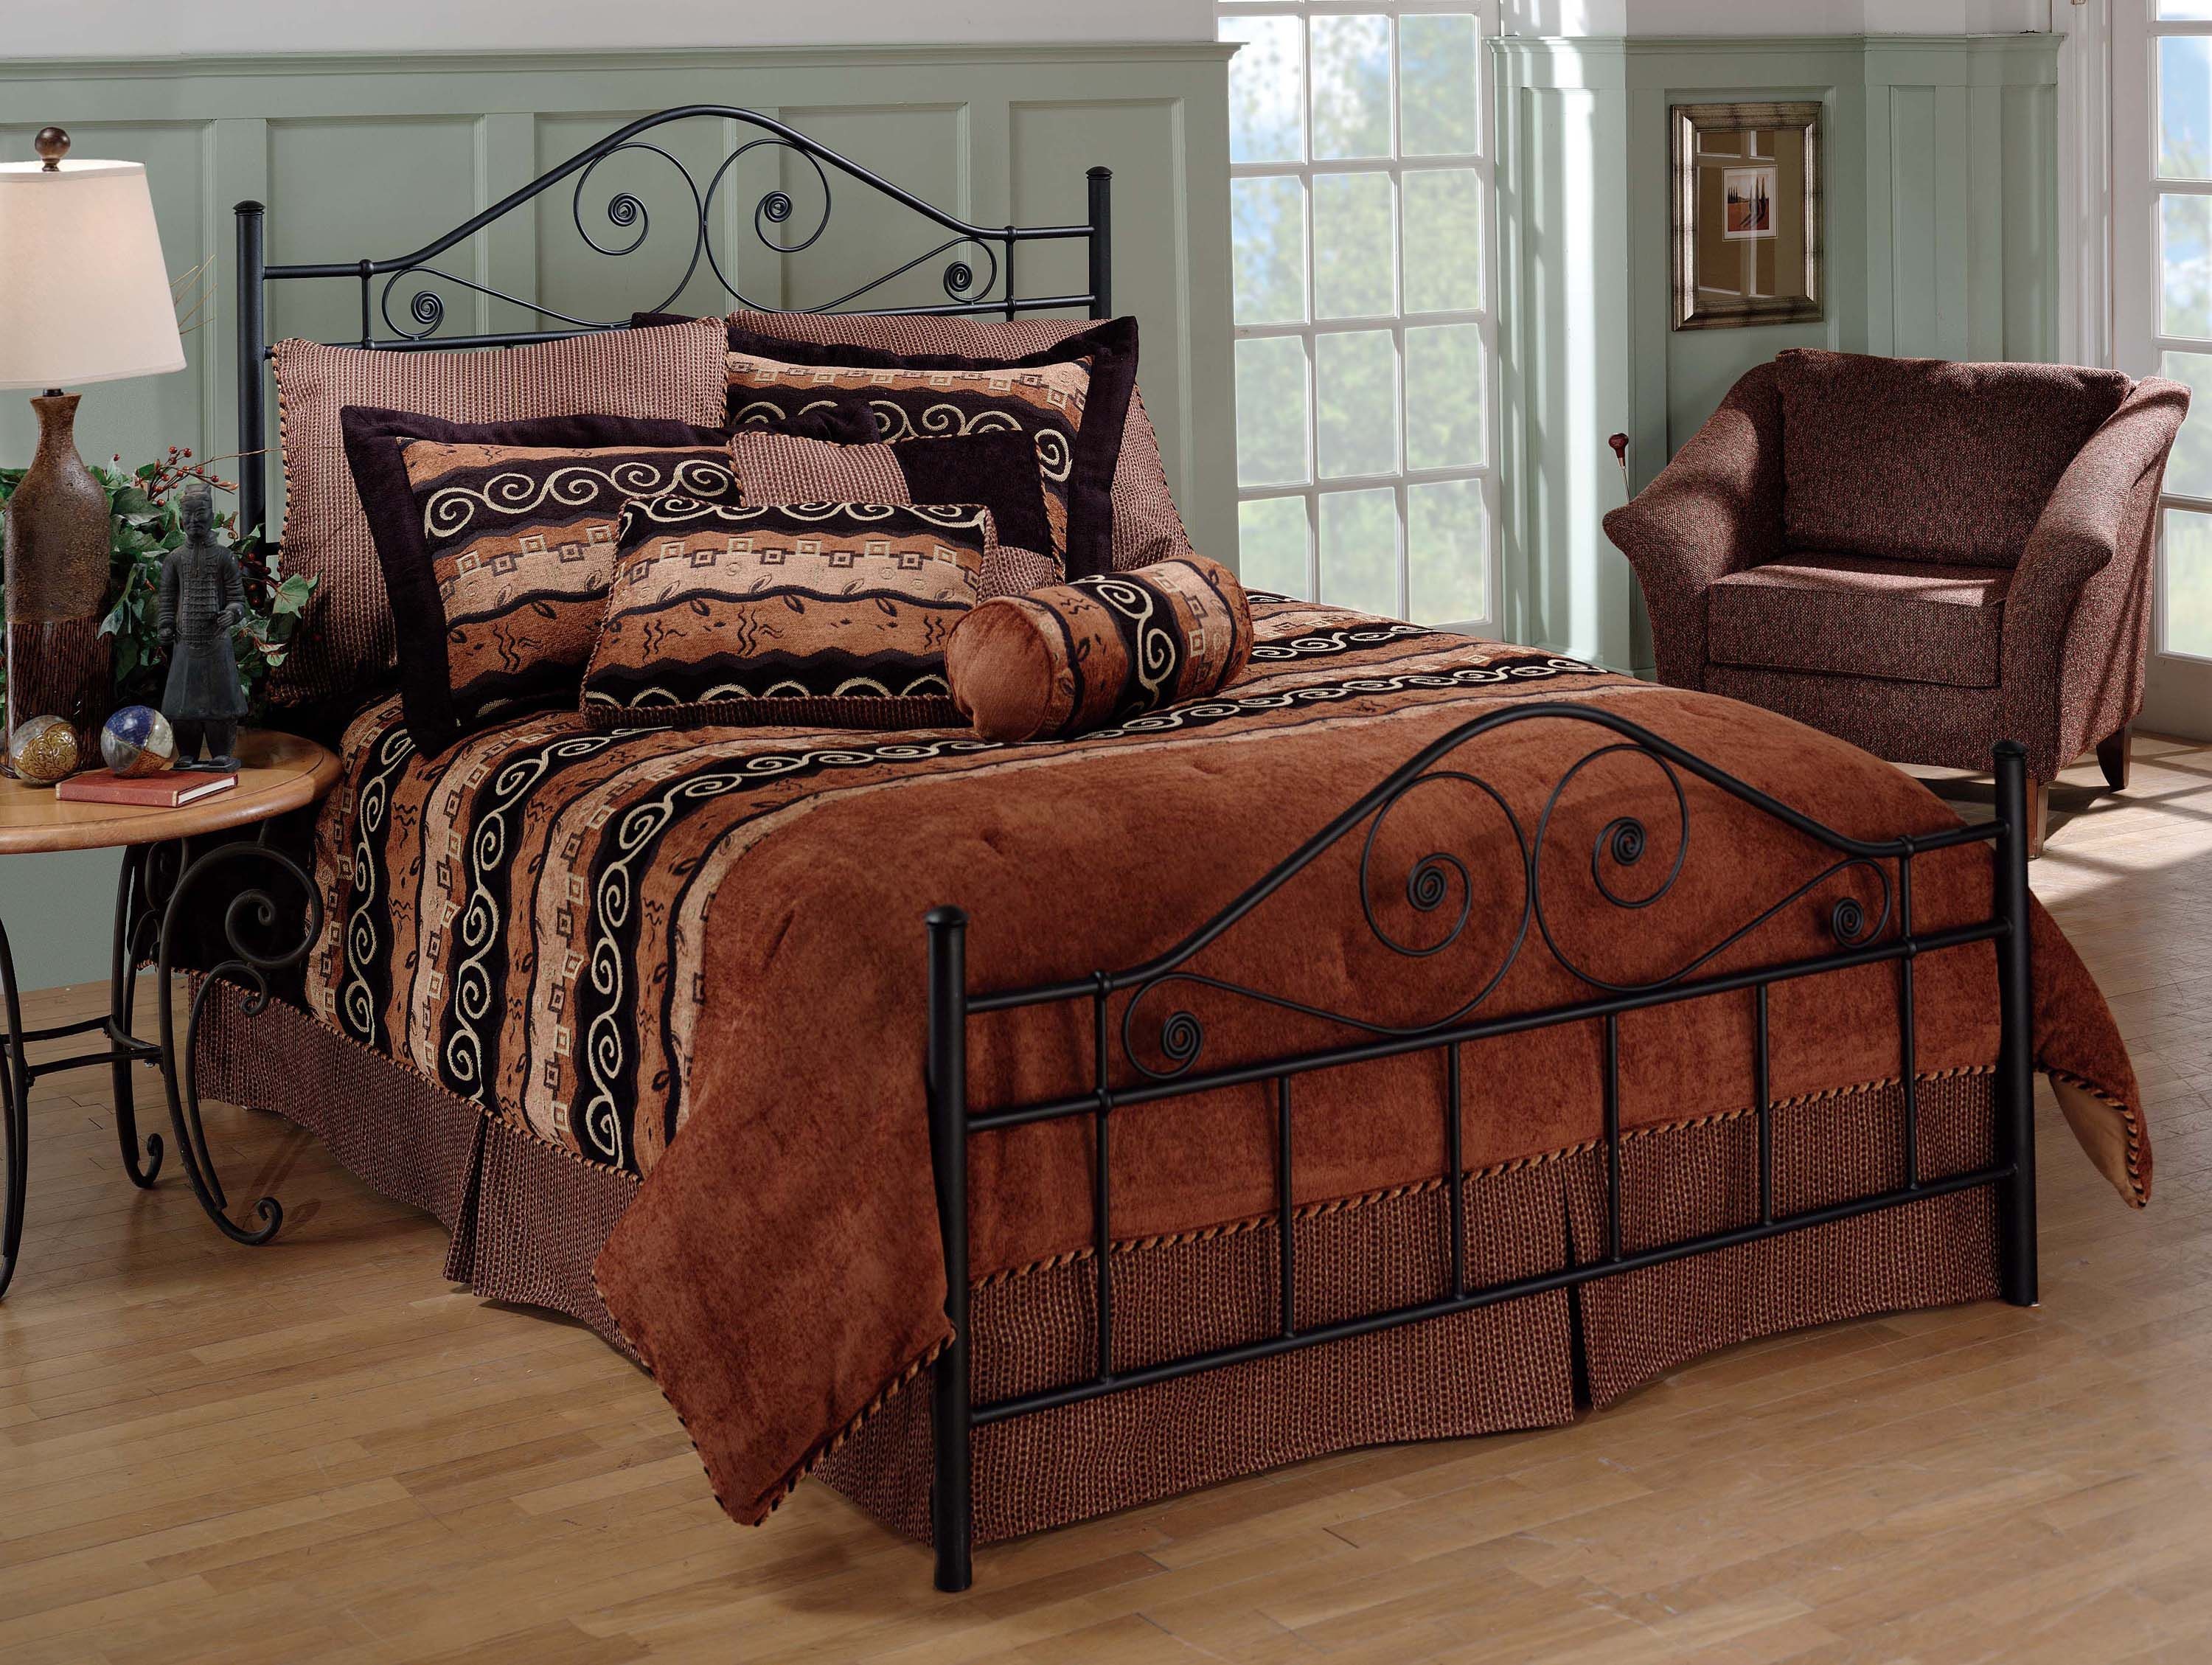 1010BQ Textured Black Hillsdale Madison Bed Set Queen Rails Not Included 